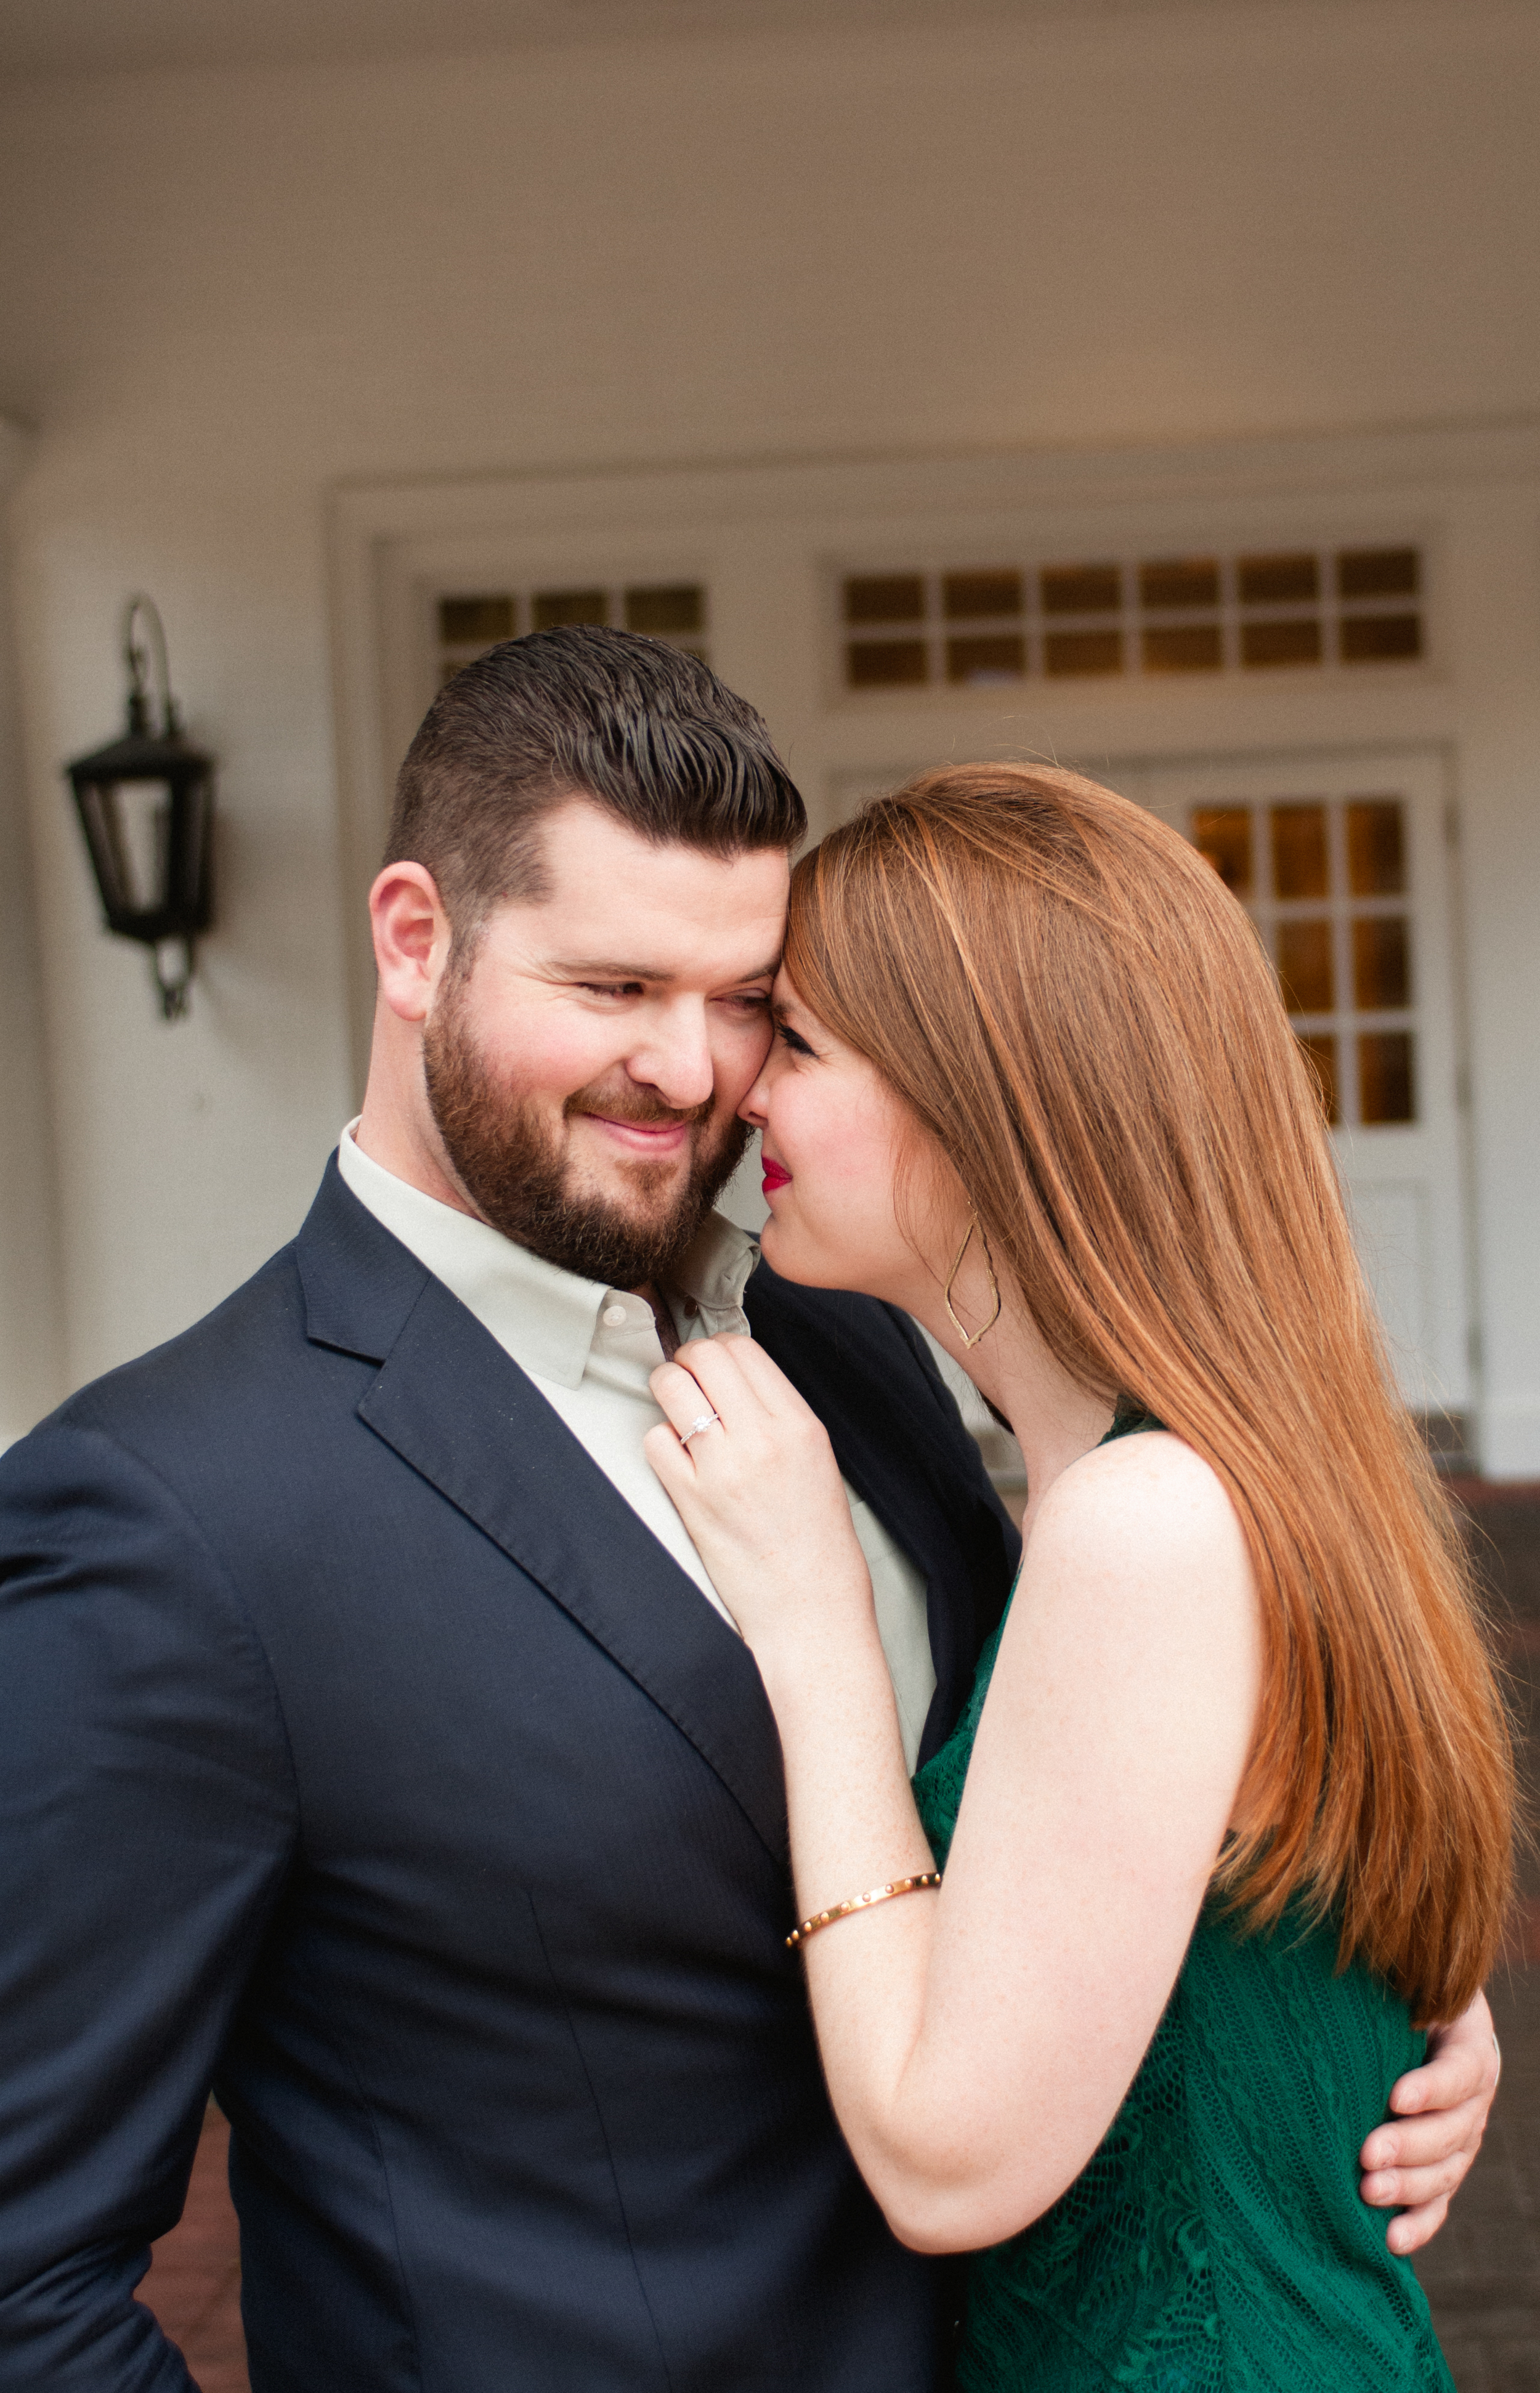 christmas pictures, christmas engagements, gentle fawn dress, engagement pictures, dallas